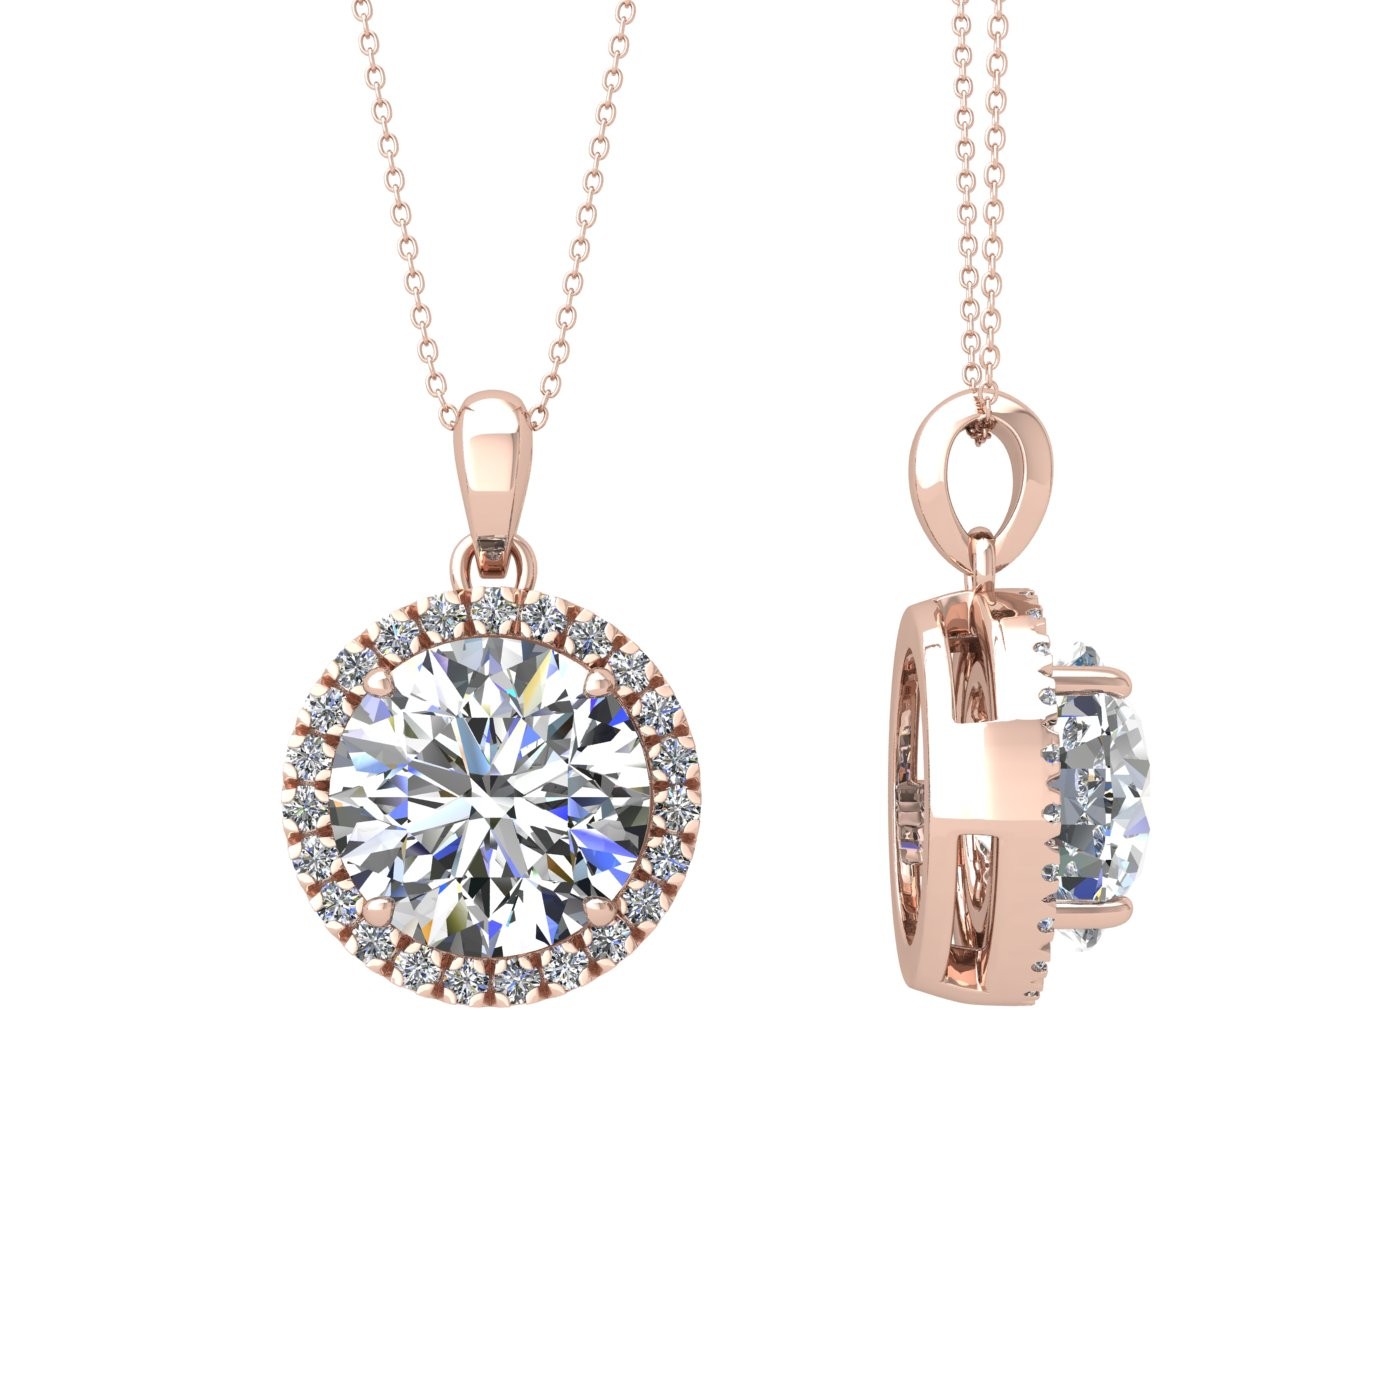 18k rose gold  1,5 ct 4 prong round shape diamond pendant with diamond pavÉ set halo including chain seperate from the pendant